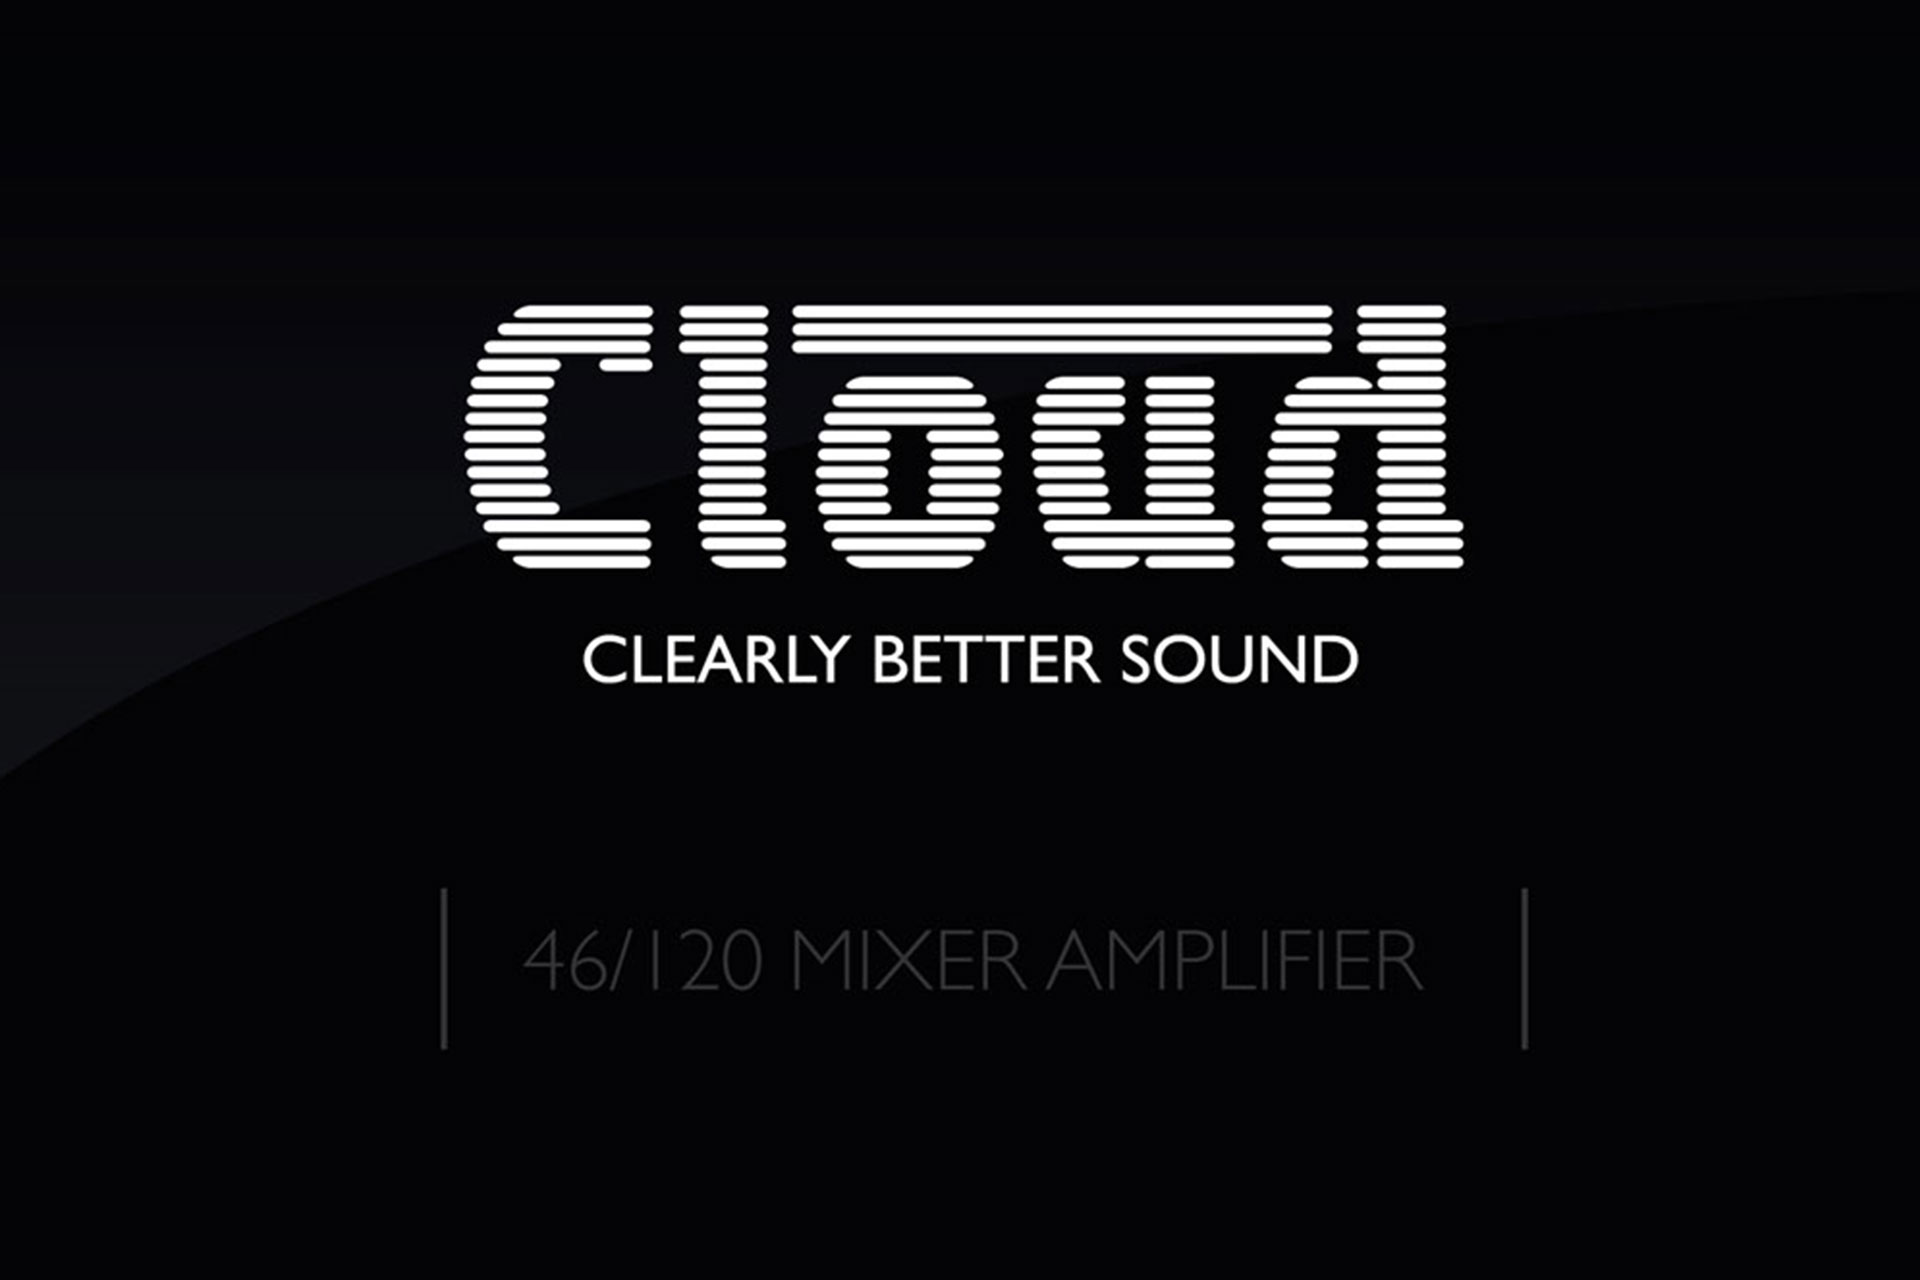 Introduction to Cloud 46/120 Mixer Amplifier by Clarity SLV